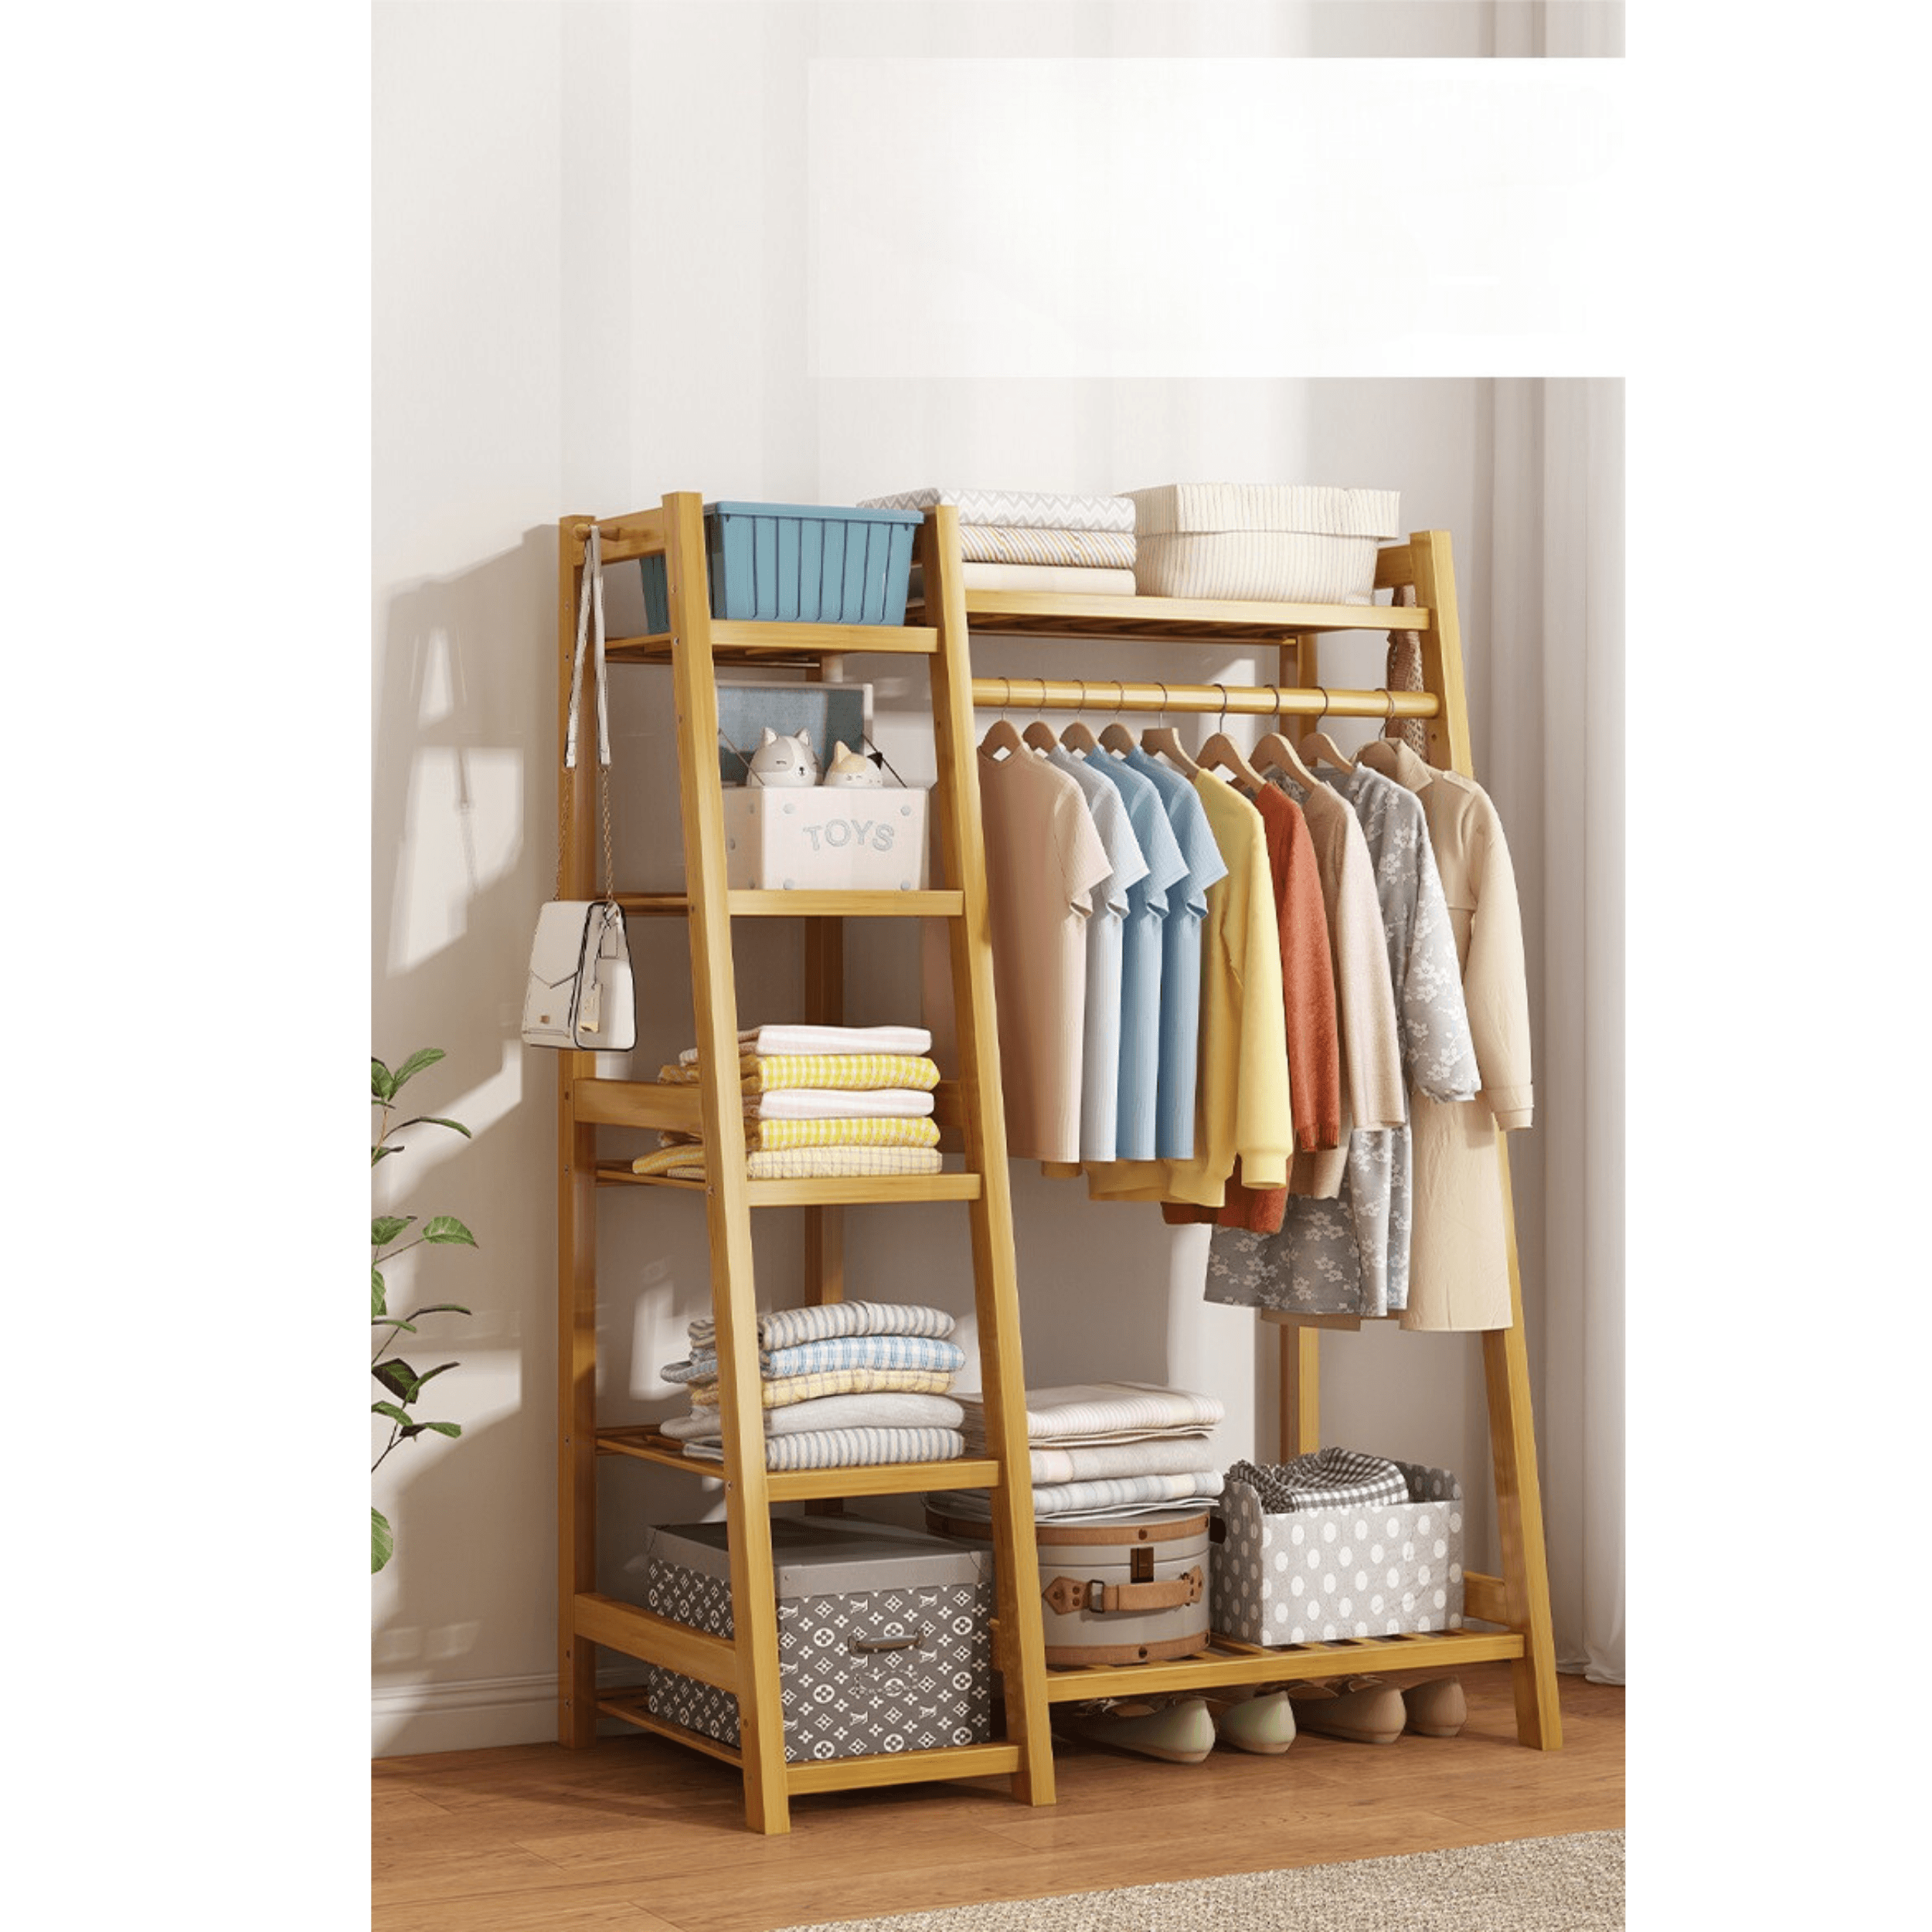 Bamboo free-standing trapezoidal clothes rack with 2-level shelves, width 116 cm.